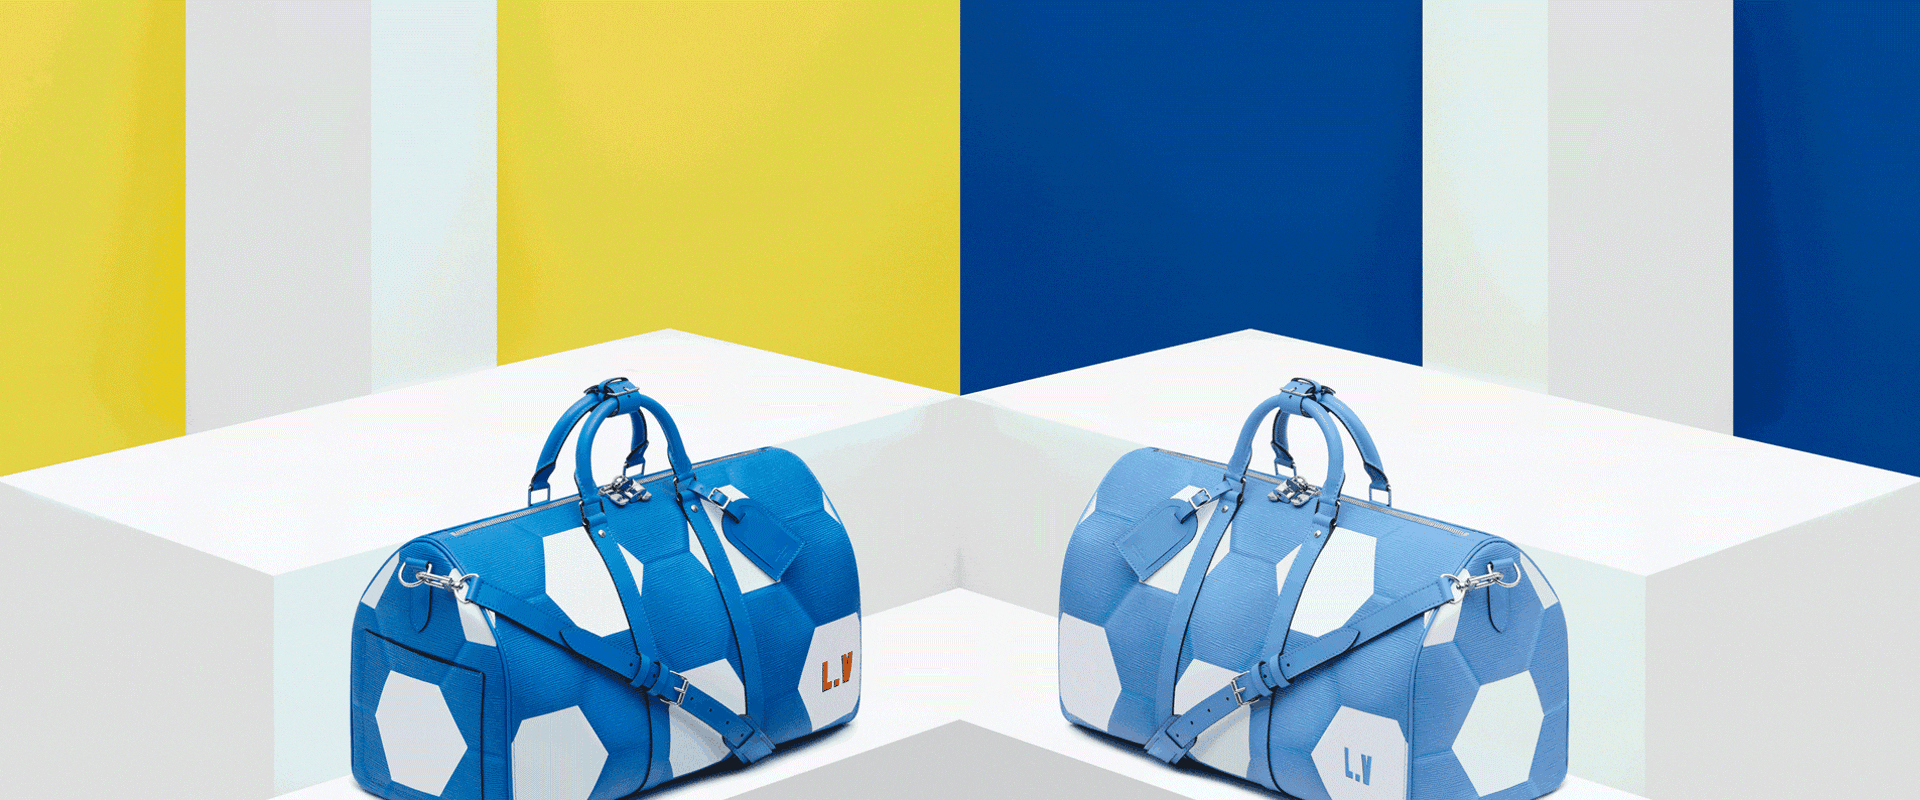 Louis Vuitton has launched its 2018 FIFA World Cup Russia Official